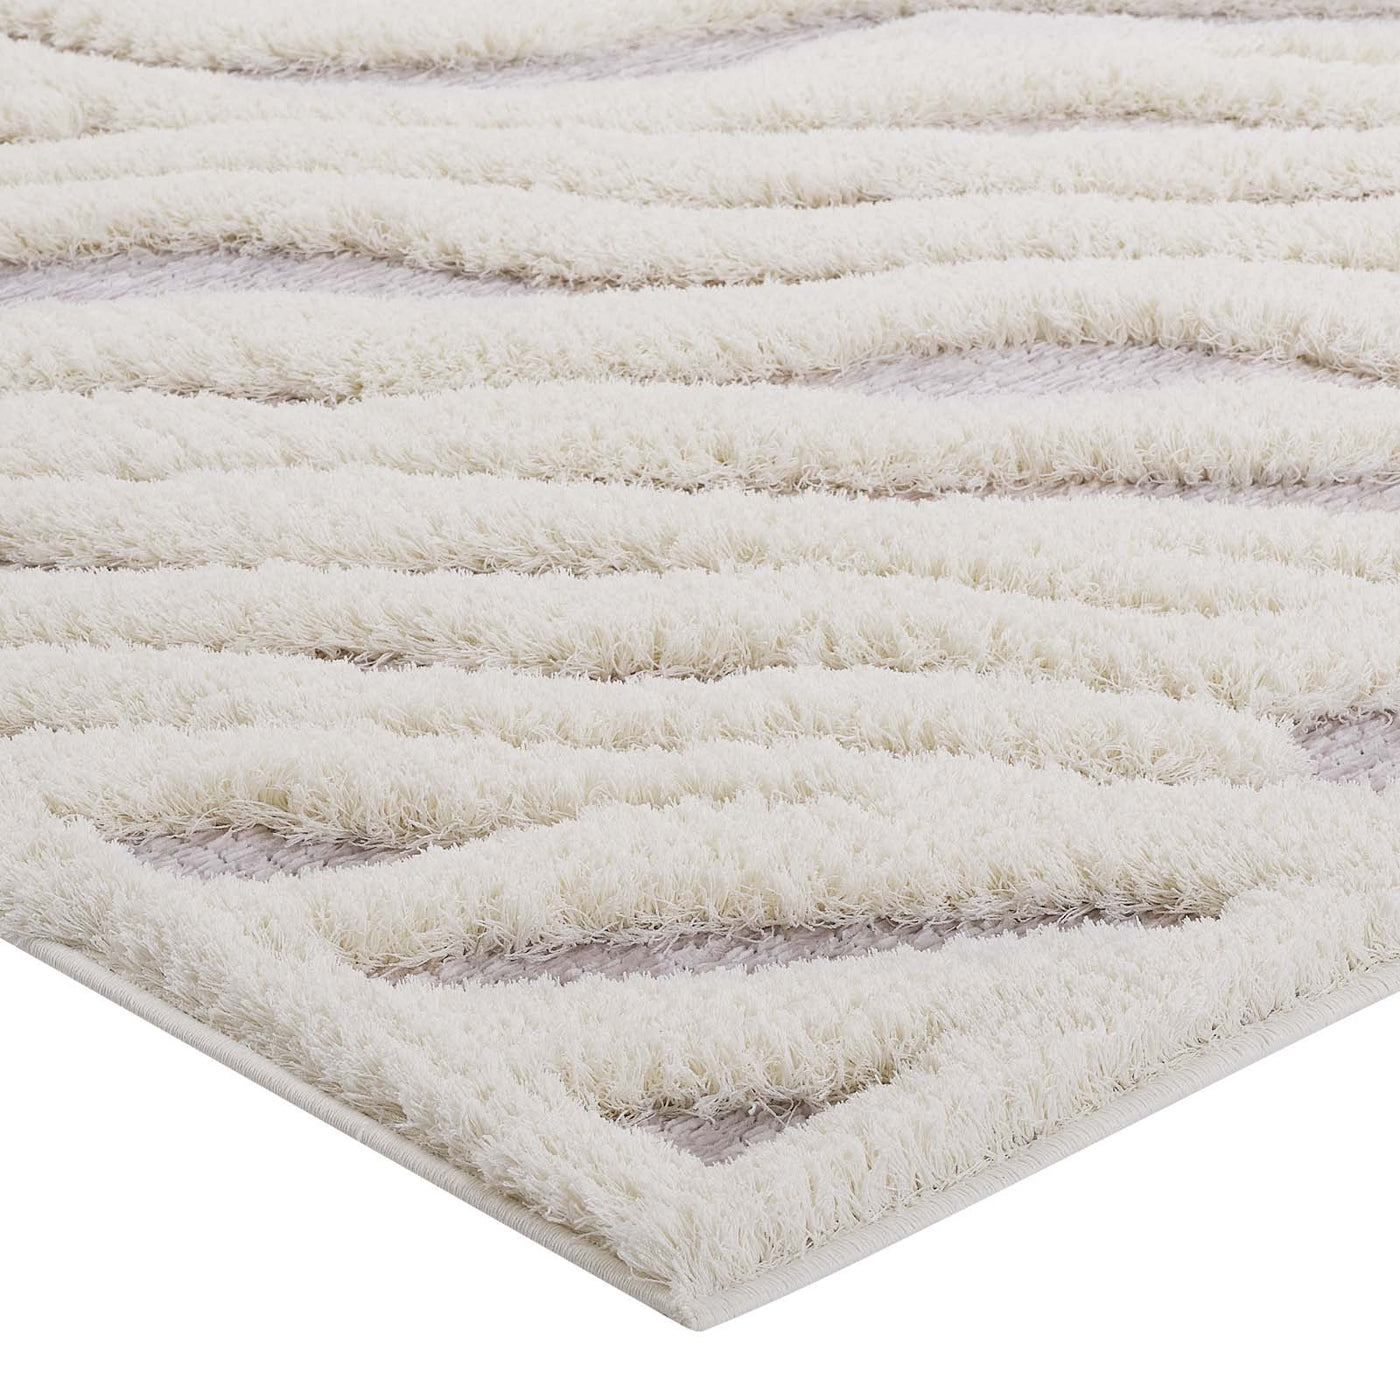 Whimsical Current Abstract Wavy Striped Shag Area Rug